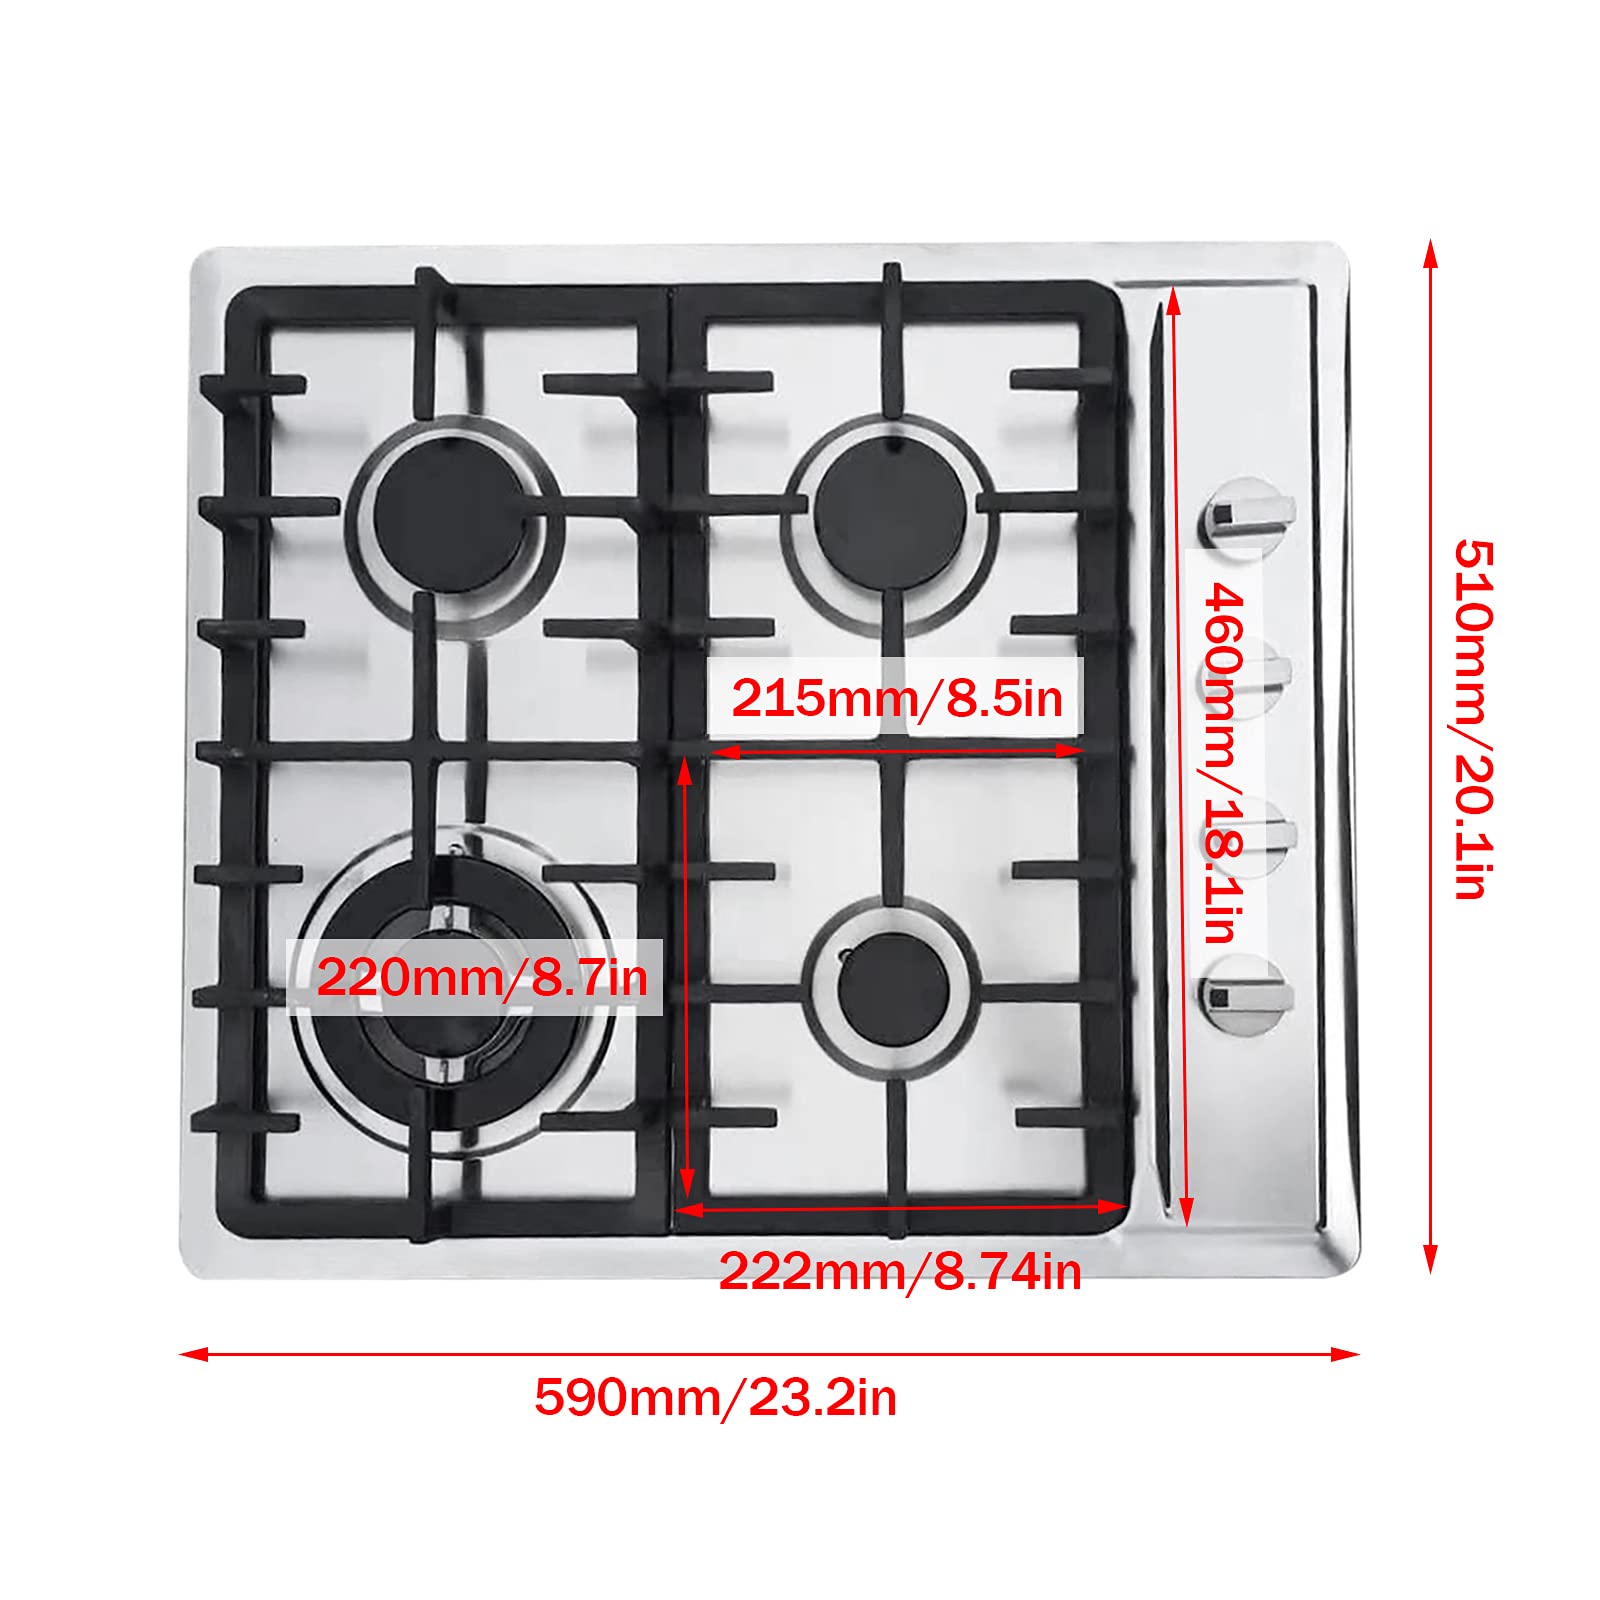 BEYANEE Built-In Gas Cooktop, 4-Hole Built-In Gas Cooktop, 23-Inch 4-Burner Gas Cooktop, Easy-Clean Gas Cooktop for Kitchen with Electric Ignition and Flame-Out System